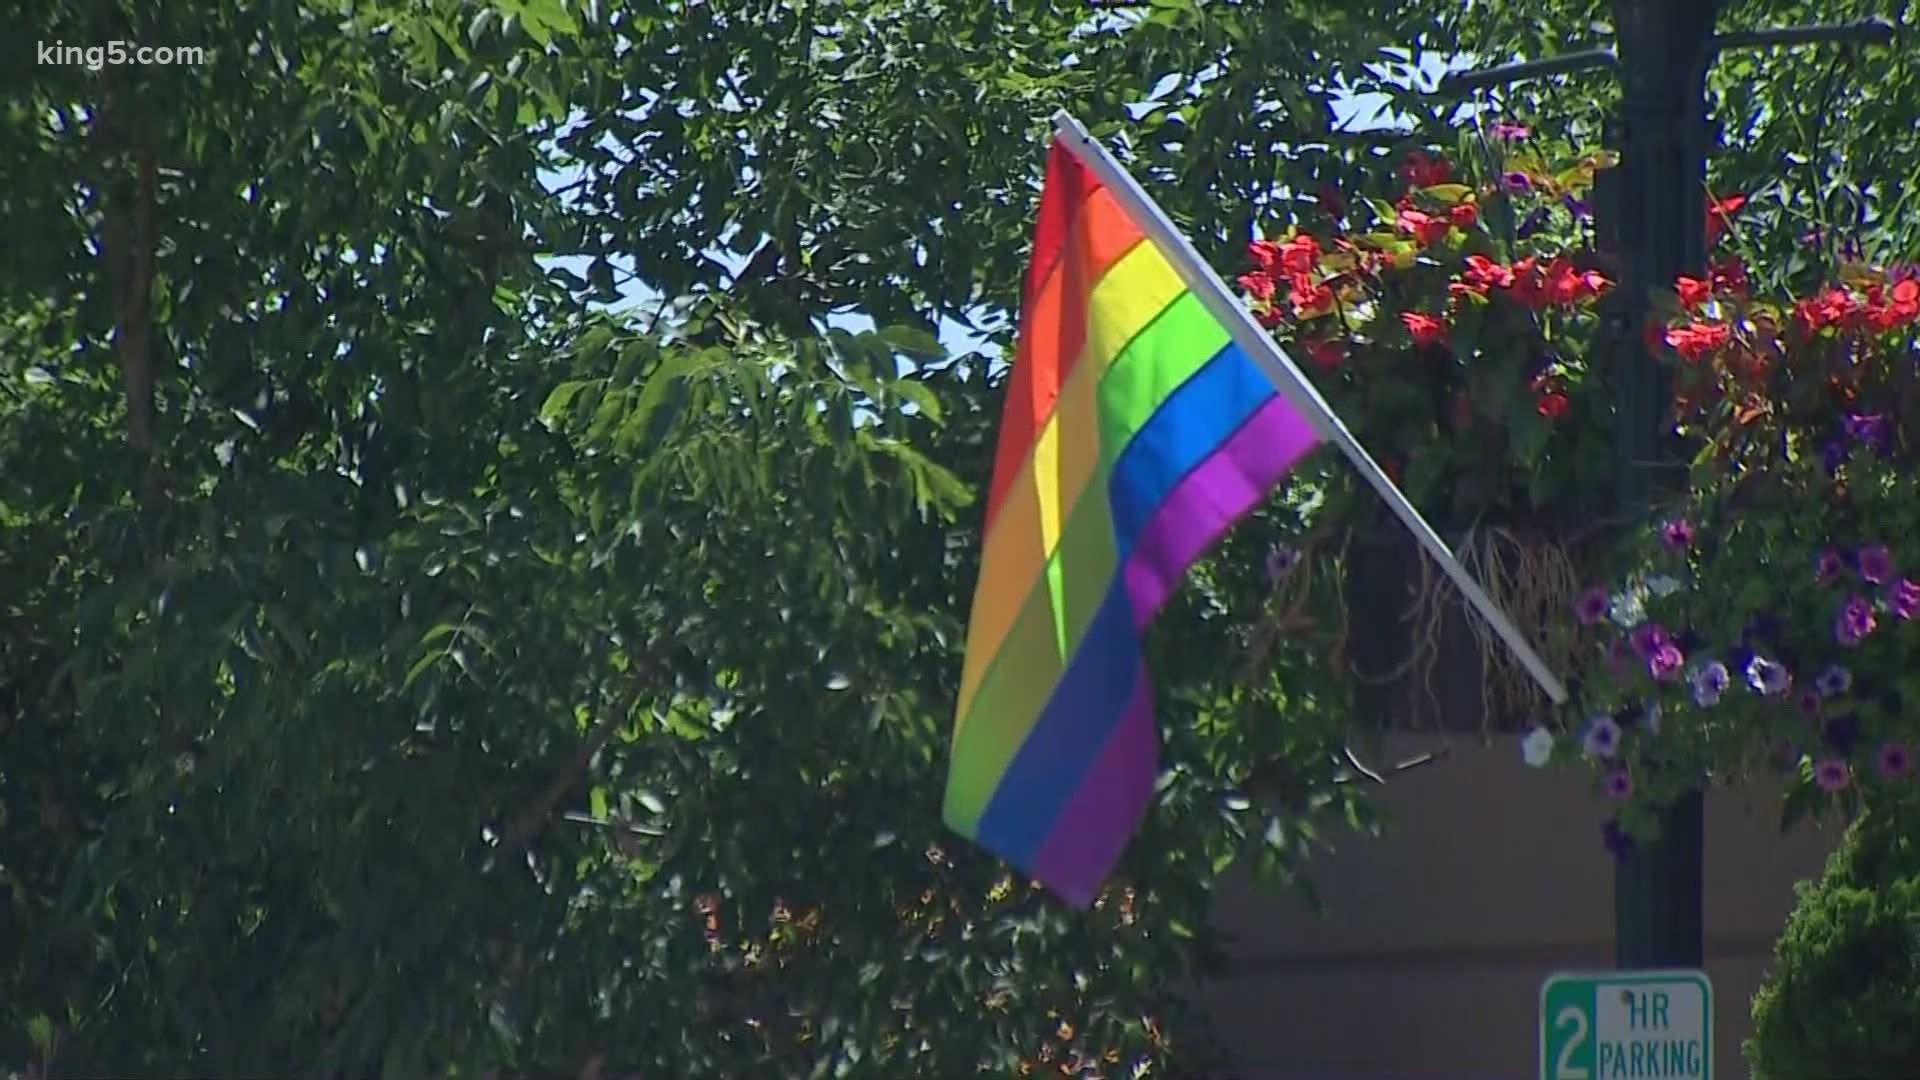 The community rallied together to replace about 38 Pride flags that were stolen from the light poles in downtown Burien last weekend.